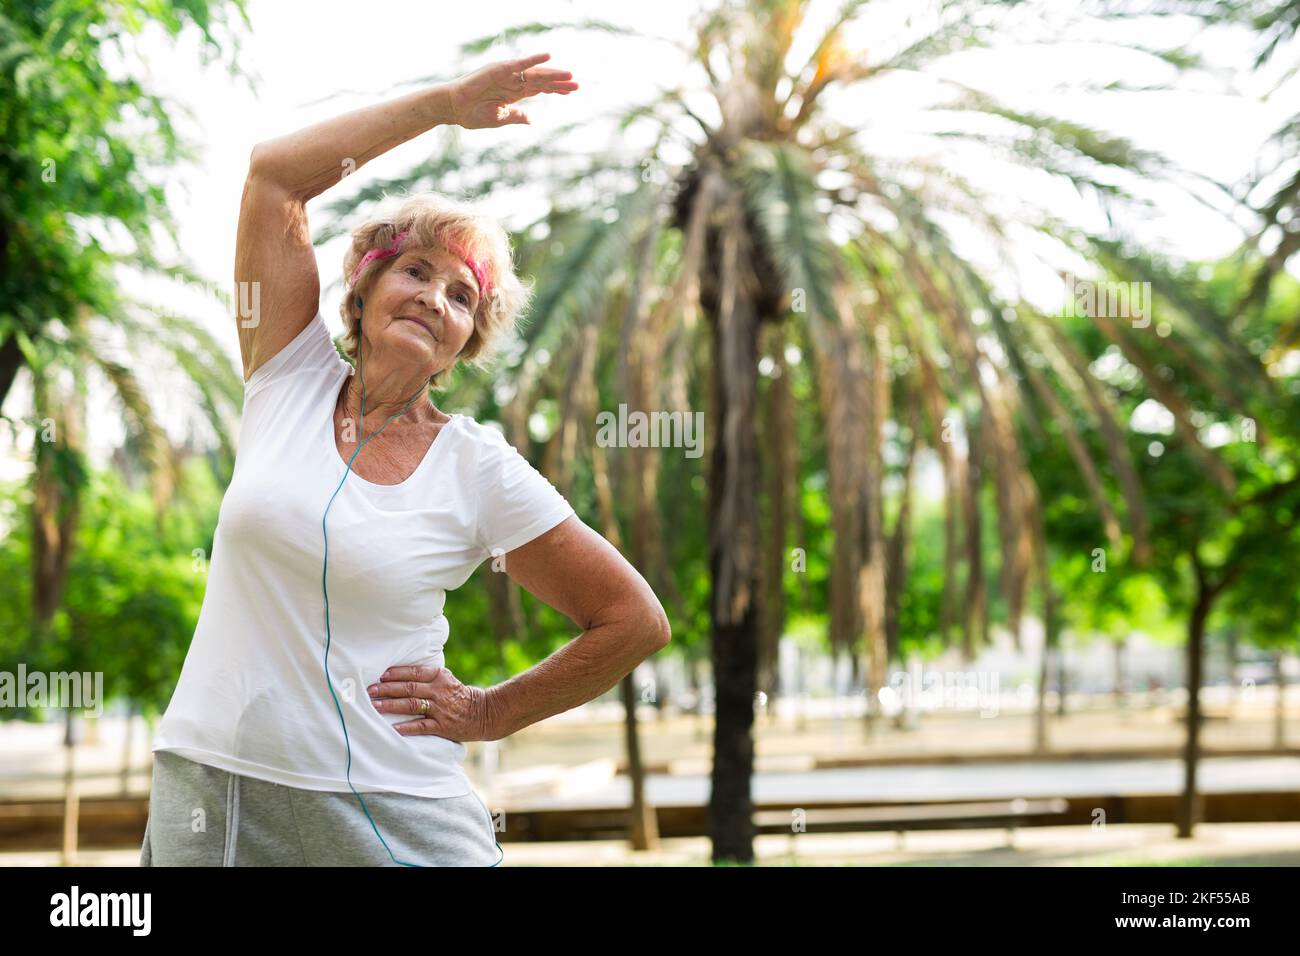 Aged woman warming up in park Stock Photo